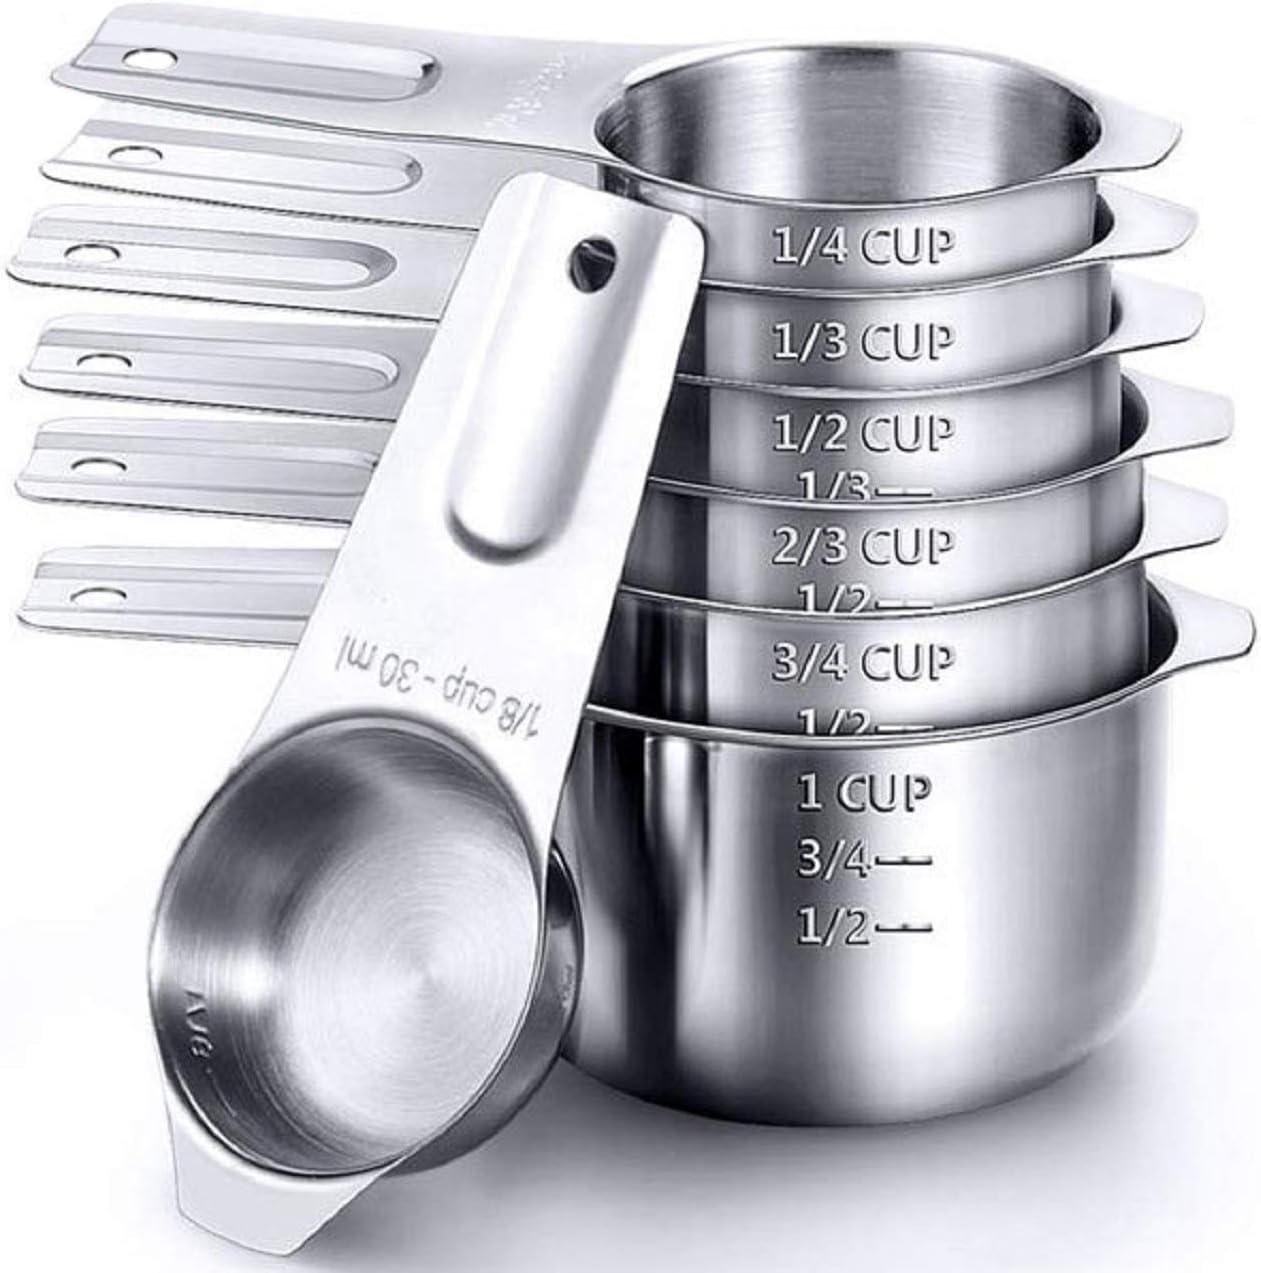 Stainless Steel Measuring Cup Set of 7pcs Durable Stackable for Precise Dry & Liquid Ingredient Measurements Ideal for Cooking and Baking - Loomini